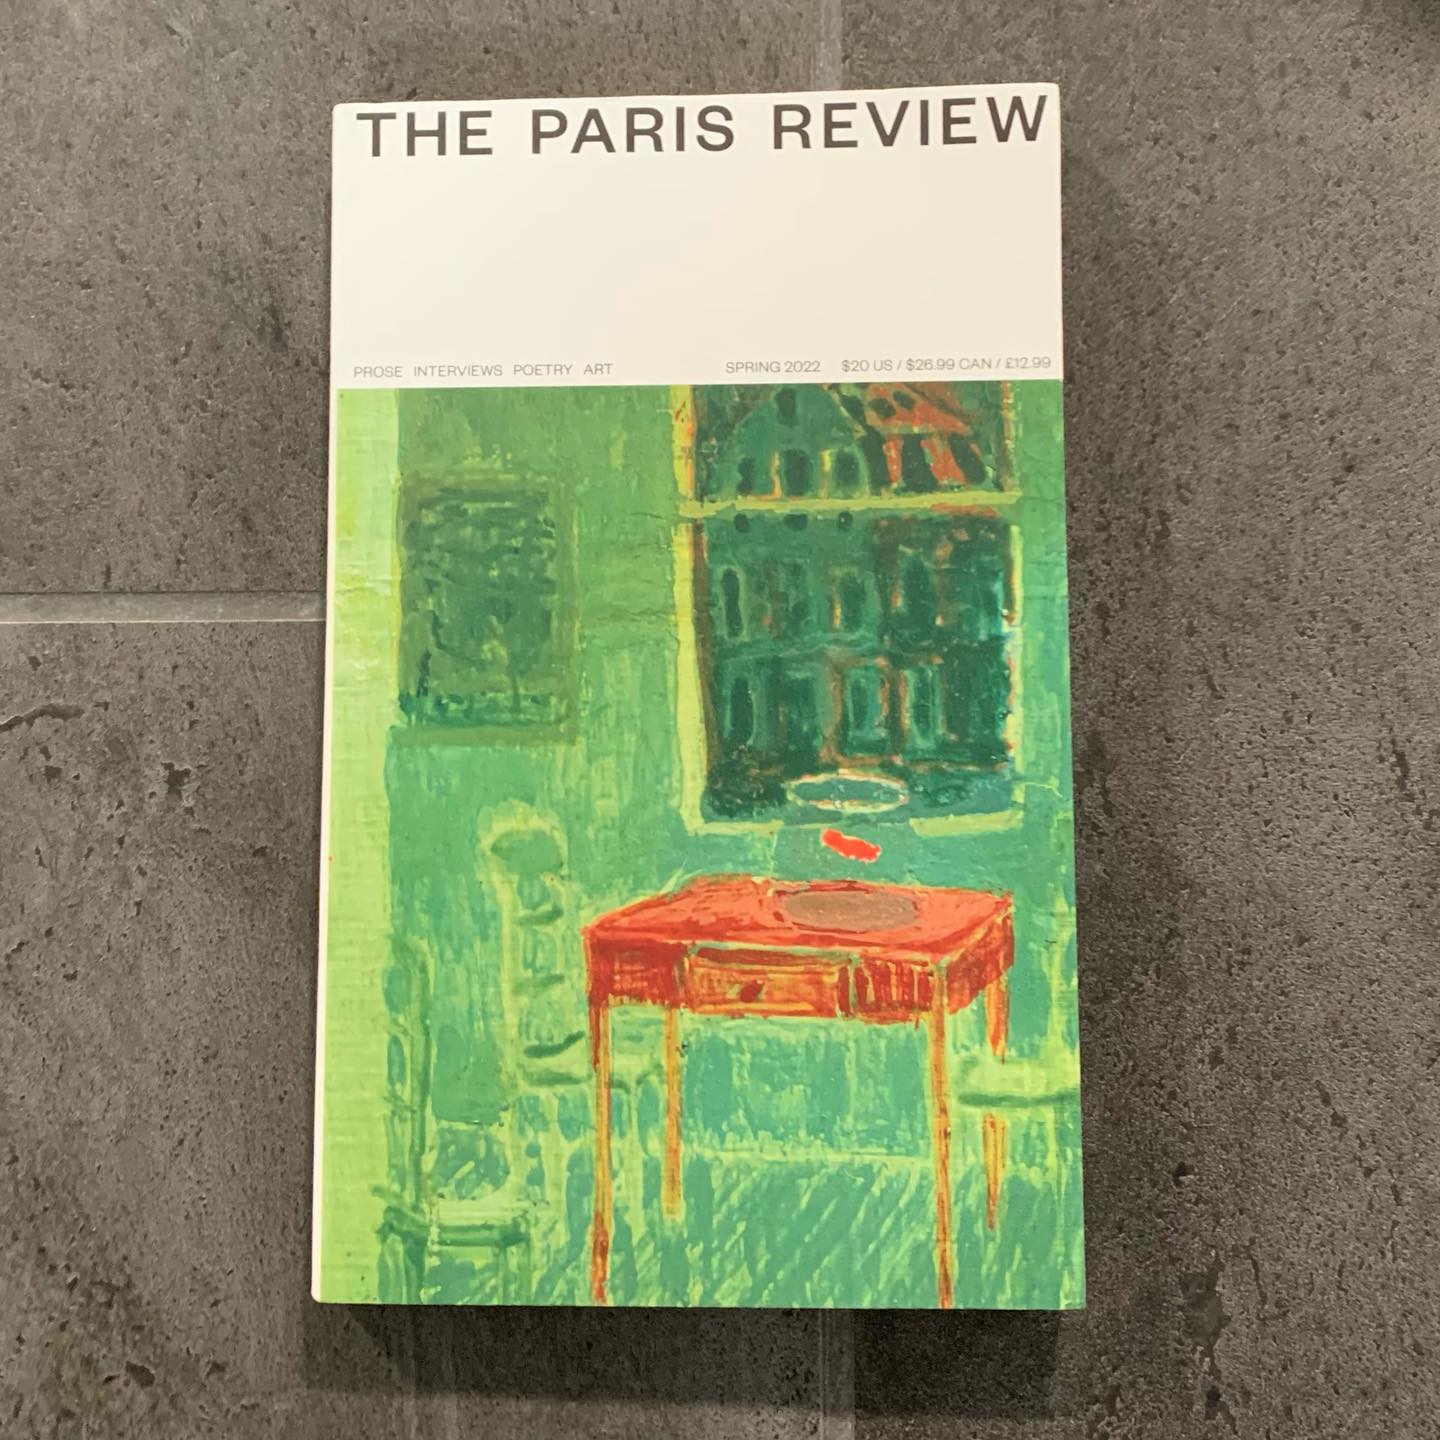 Good morning, @parisreview! You’re looking especially lovely these days. I am loving the cover art recently. This is a painting by @andrew.cranston, photographed by @alandimmick.